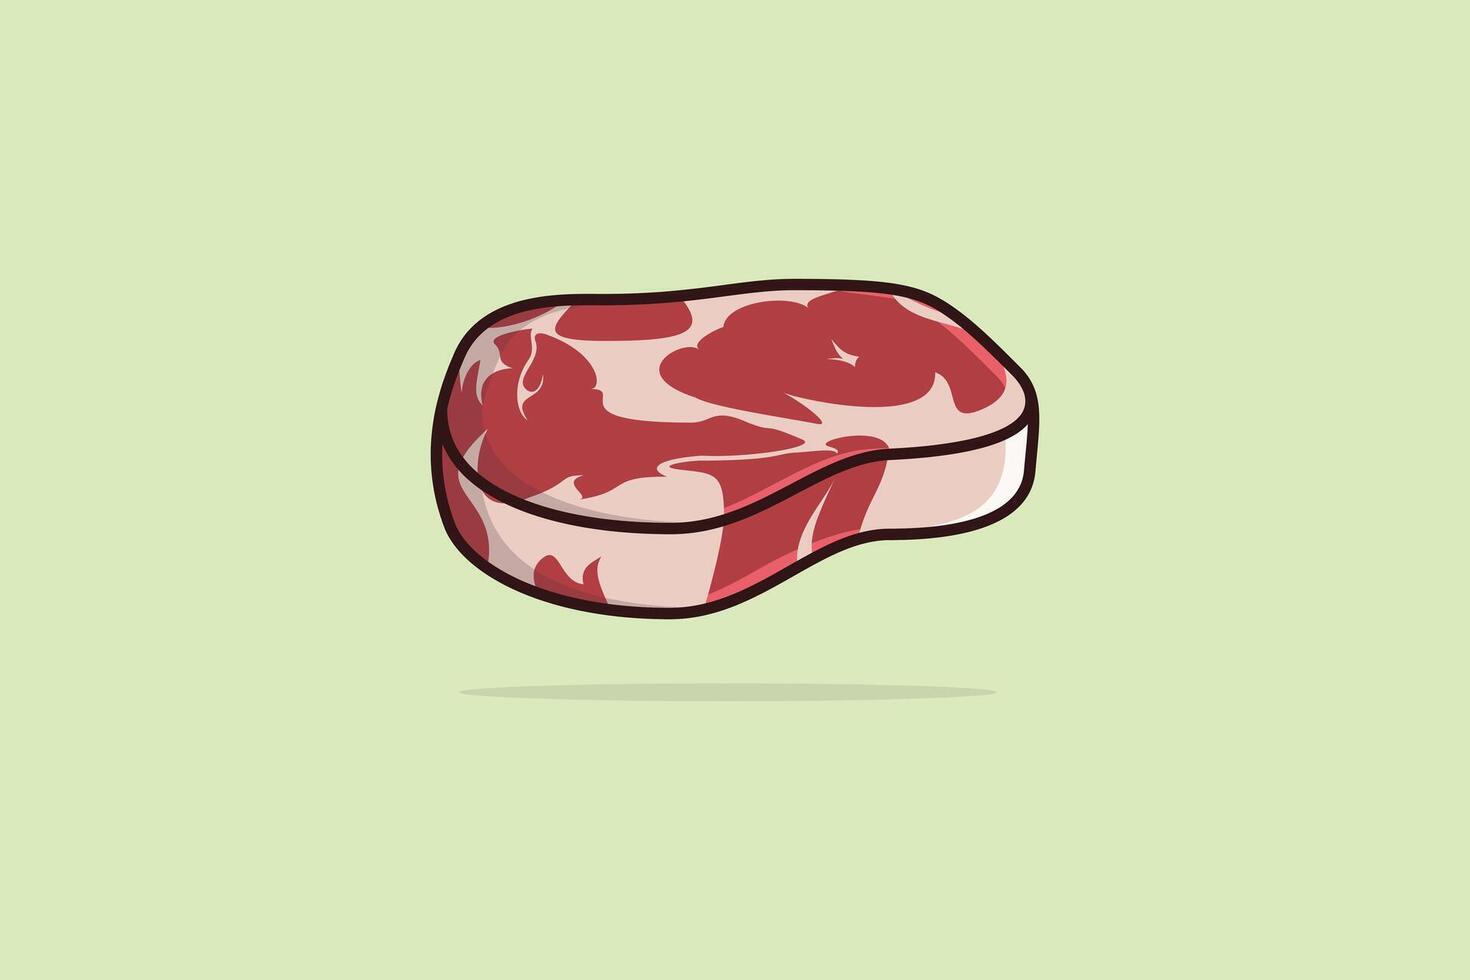 Barbecue Grill Steak Raw Meat vector illustration. Food object icon concept. Slice of steak, fresh meat. Uncooked pork chop vector design.